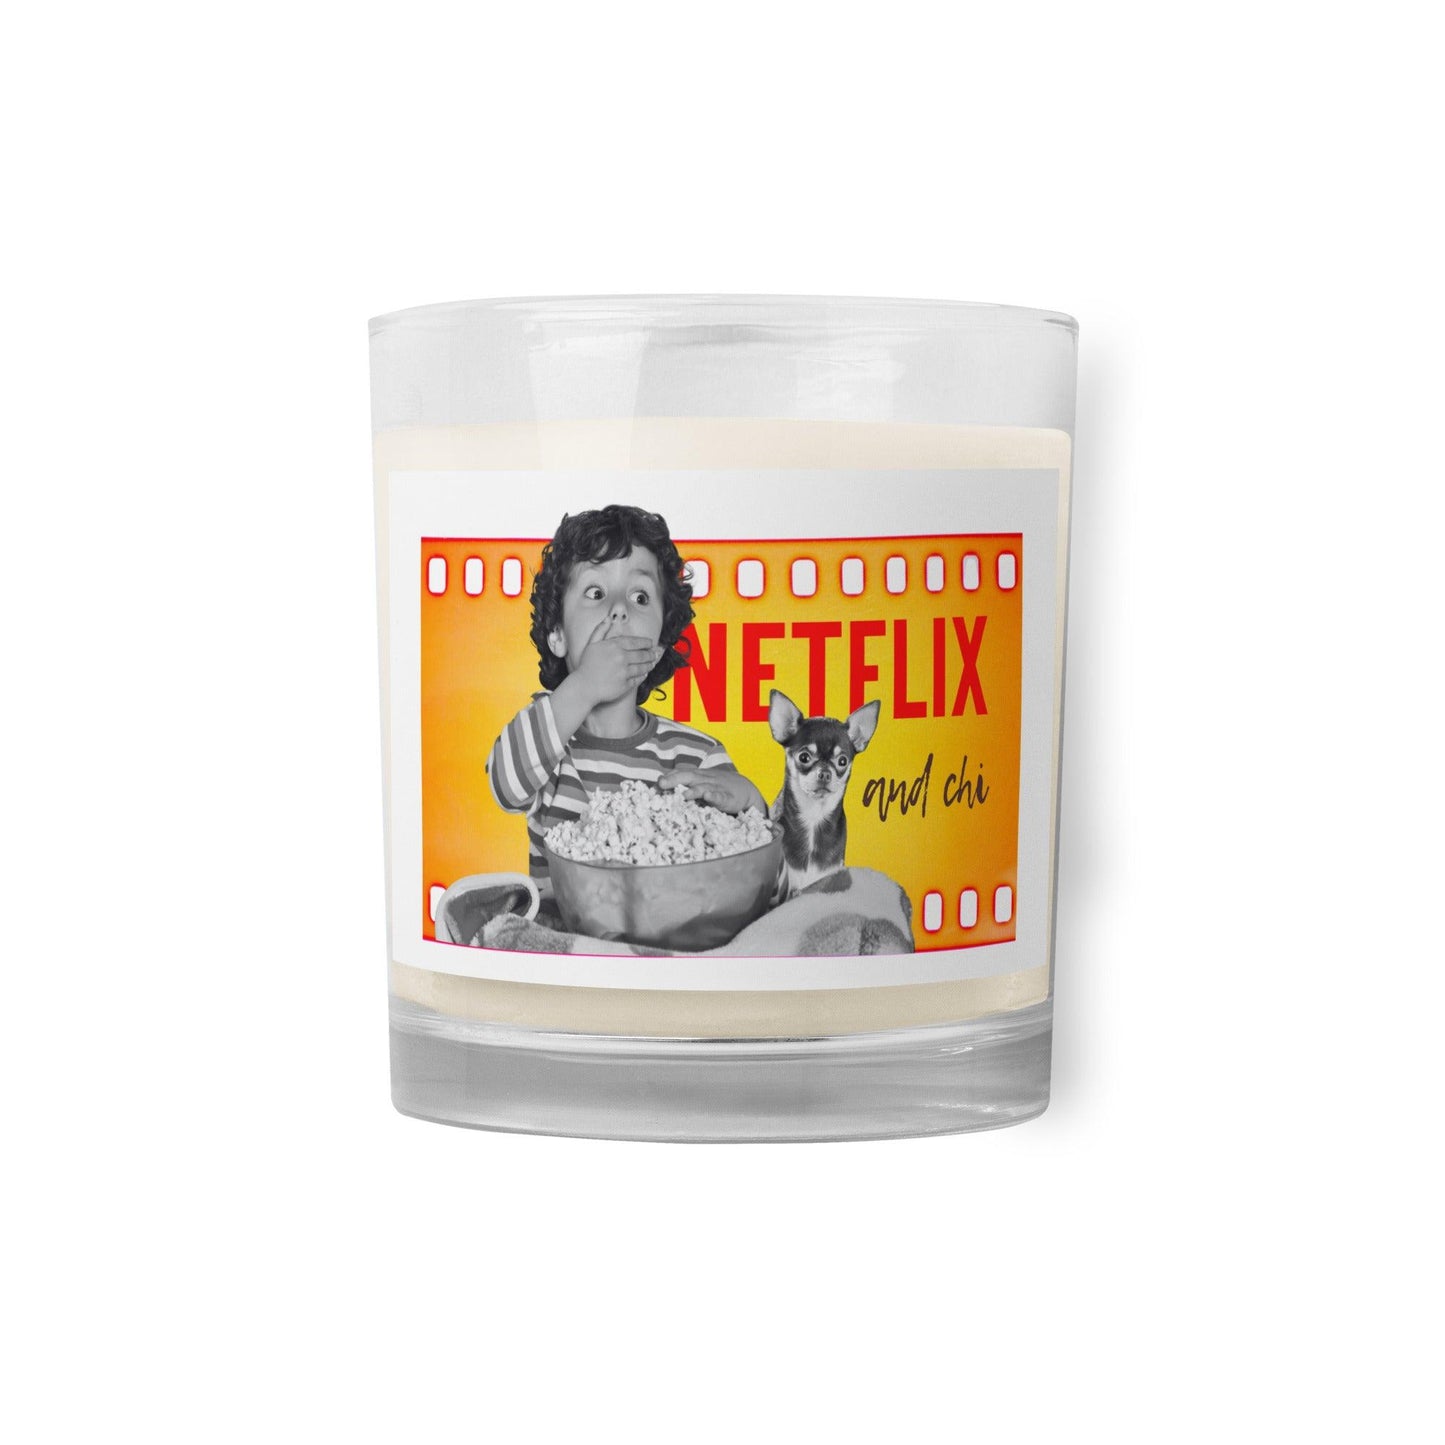 What's better than a Saturday night at home doing Netflix and Chill? Netflix and CHI! If your best Netflix and chill sofa buddy is a little chihuahua, then this adorable Netflix and Chi candle is meant for you. Or a brilliant gift for friends and family who are chihuahua parents. This is an unscented non-toxic soy candle with a cotton wick in a glass jar featuring a boy and his chihuahua pal watching a movie together. Perfect for a romantic glow on movie nights in. Design by Renate Kriegler for Chimigos.